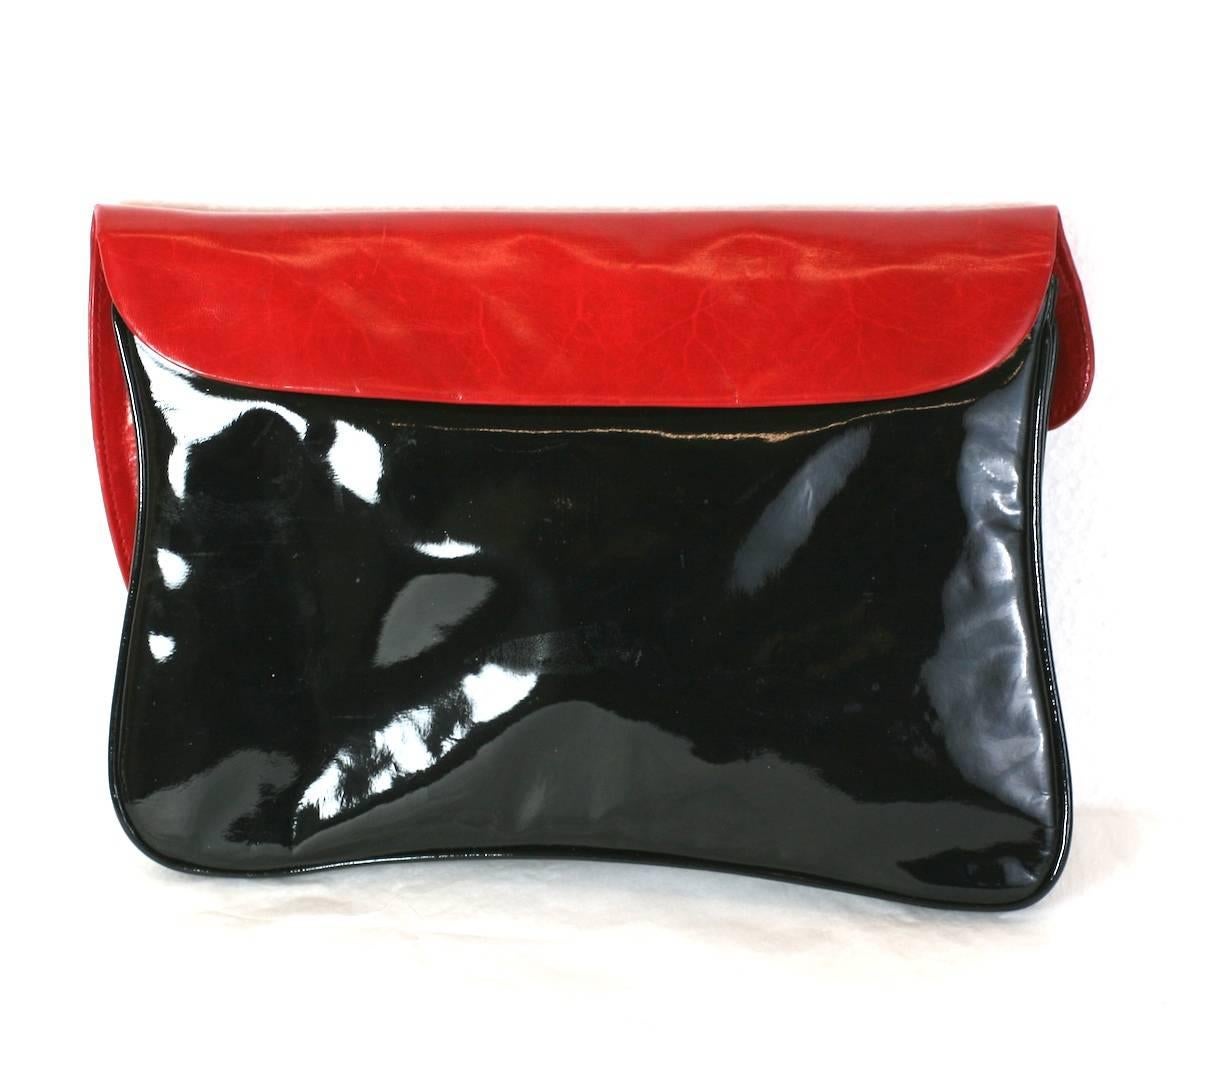 Italian Postmodern Clutch in calf and patent with charming paint drip motif. Red calf leather contrasts nicely against the sleek back patent leather. Long crossbody shoulder strap can be concealed inside. 1980's Italy. Excellent condition. 12